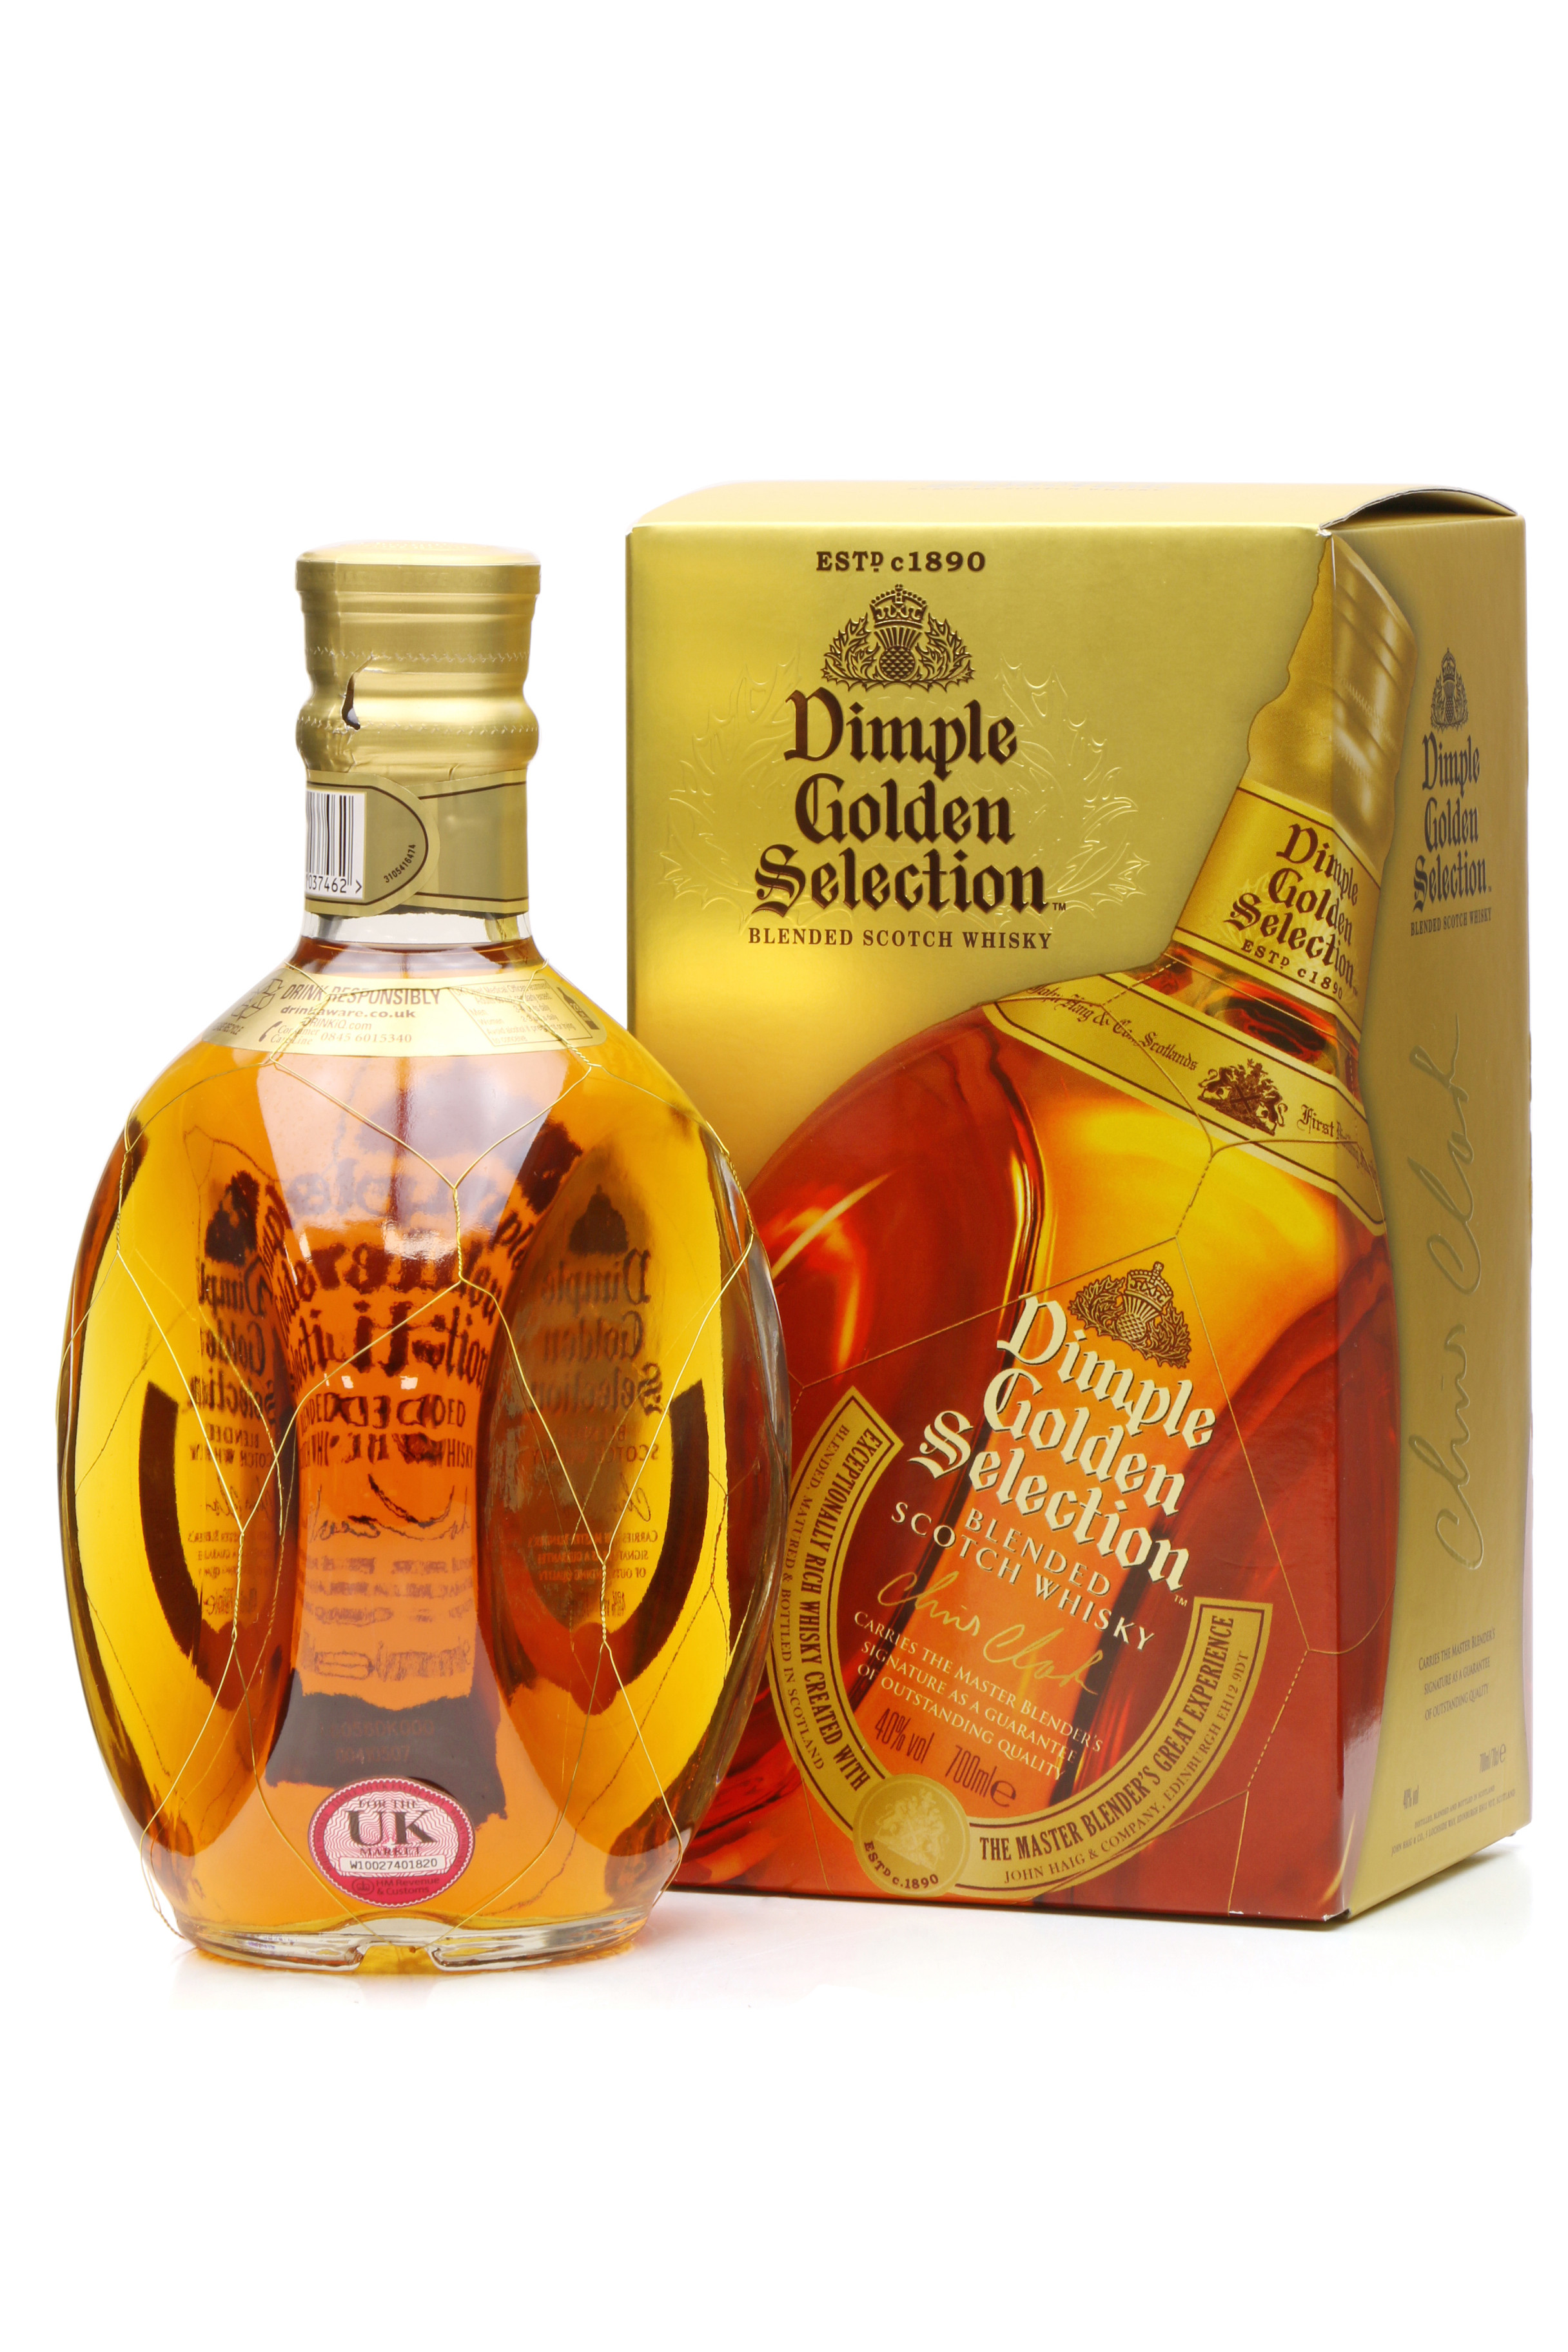 Dimple Golden Selection - Just Whisky Auctions